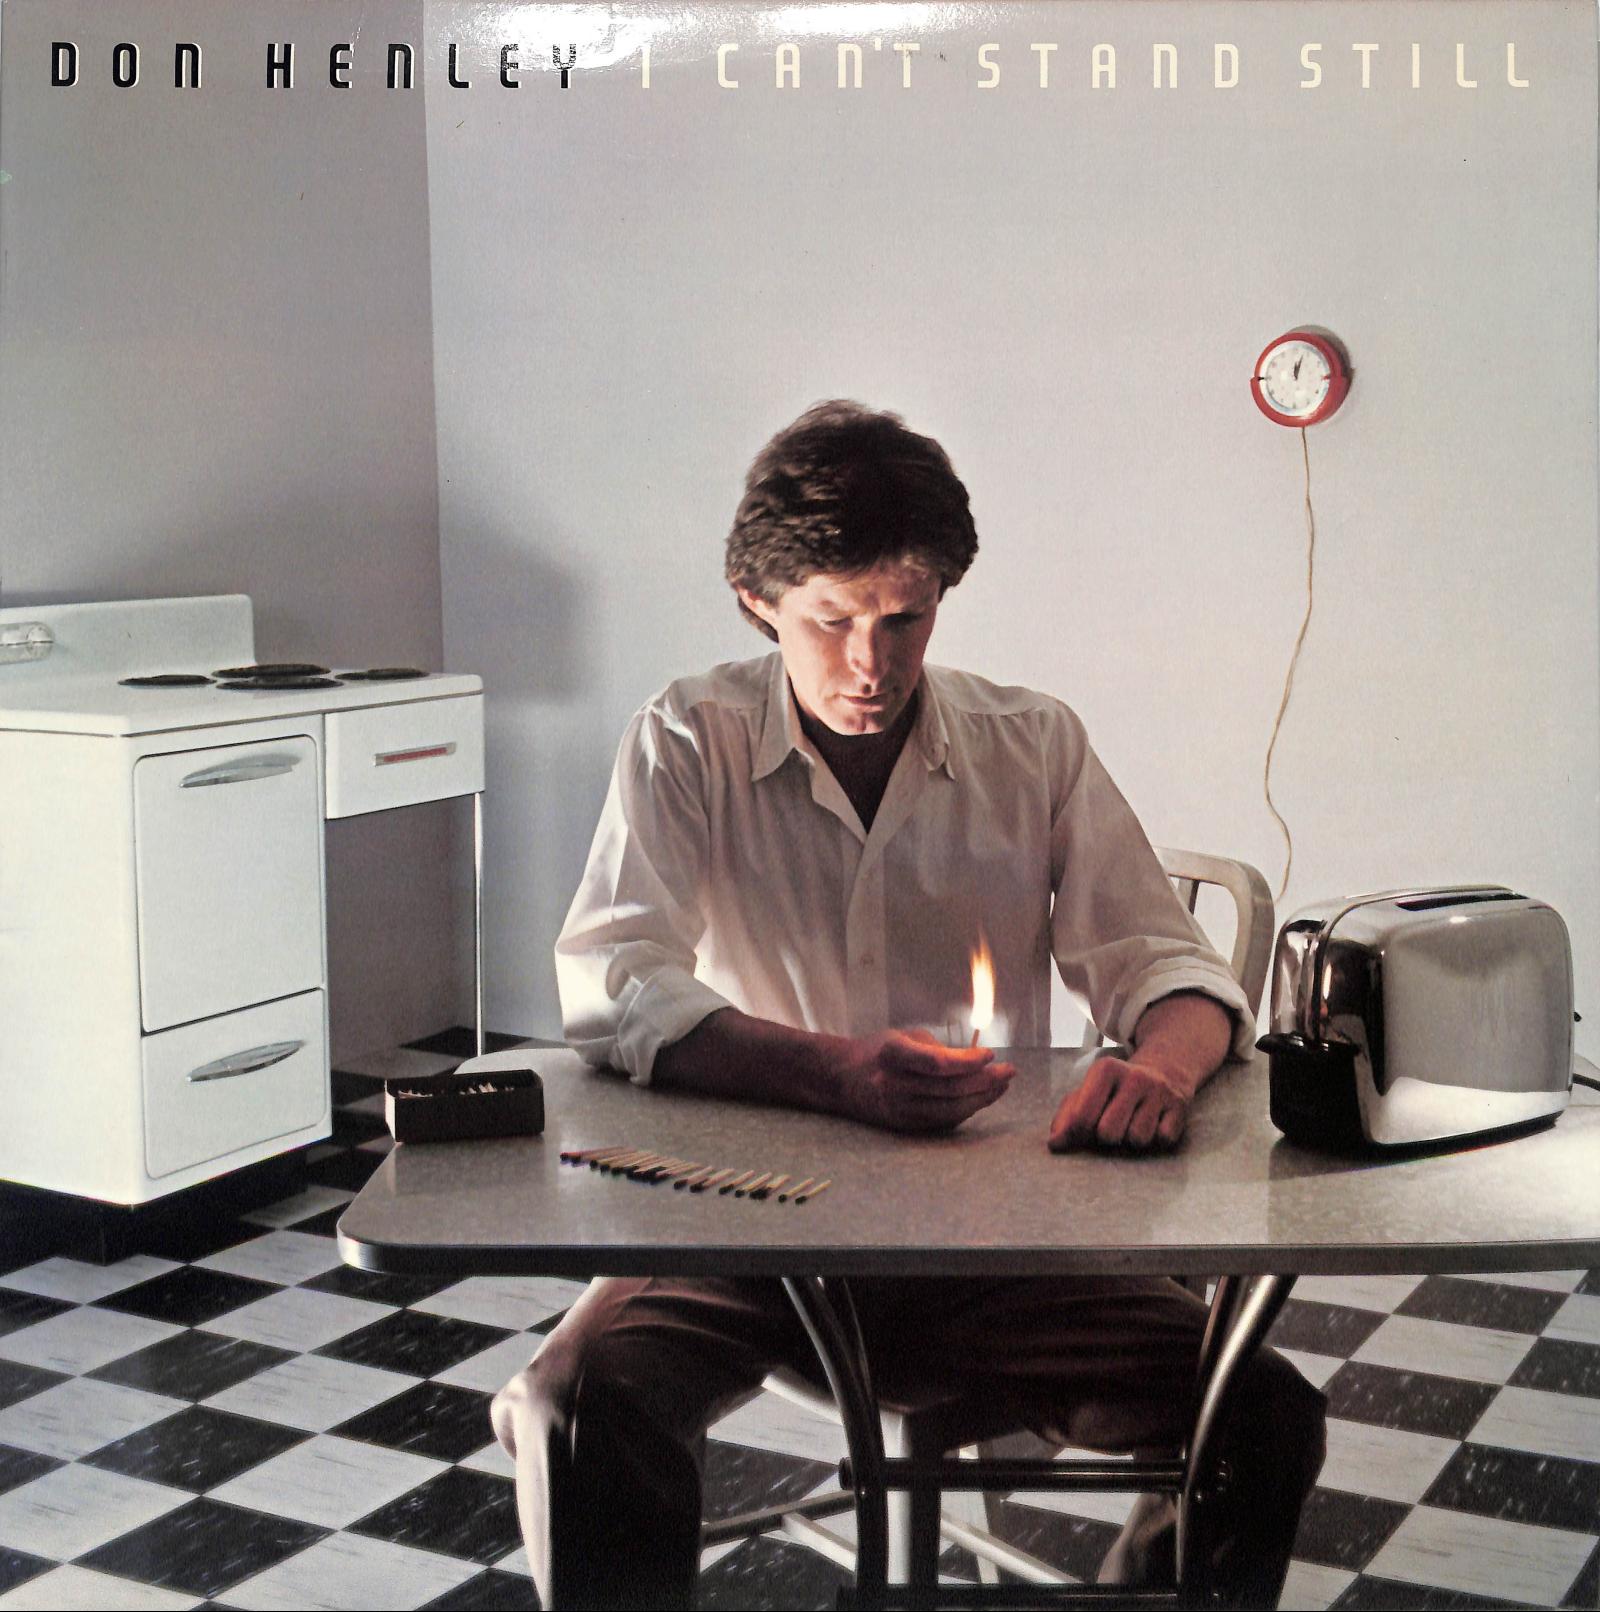 DON HENLEY - I Can't Stand Still